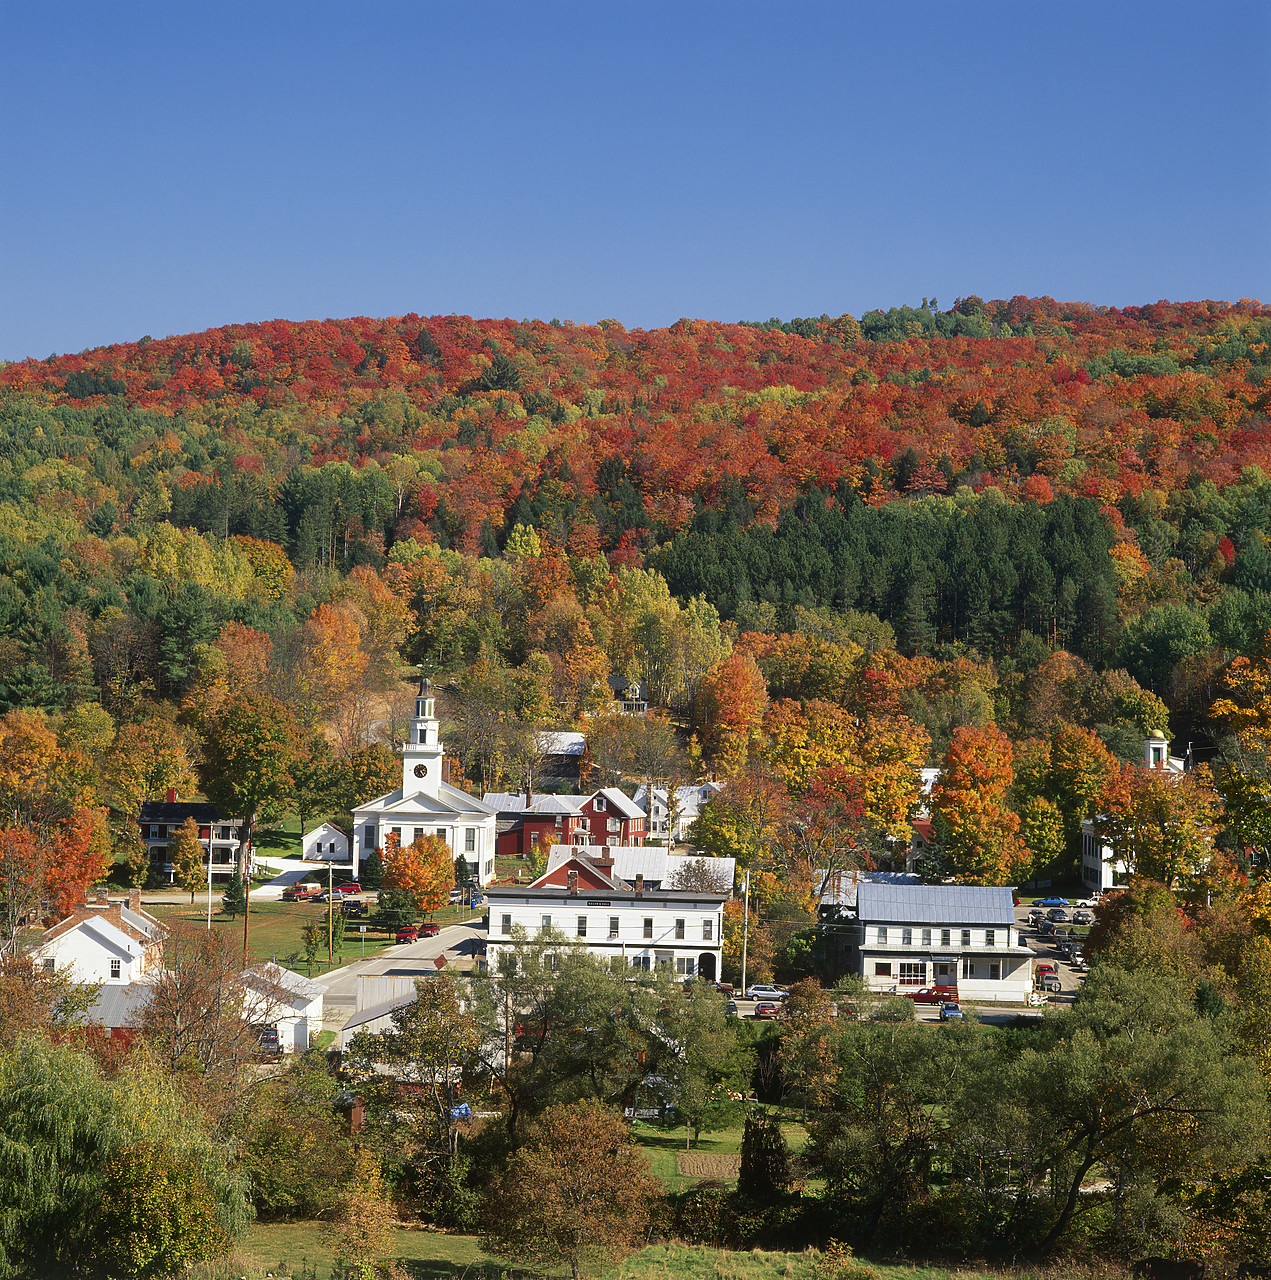 #955763-4 - View over Chelsea in Autumn, Vermont, USA